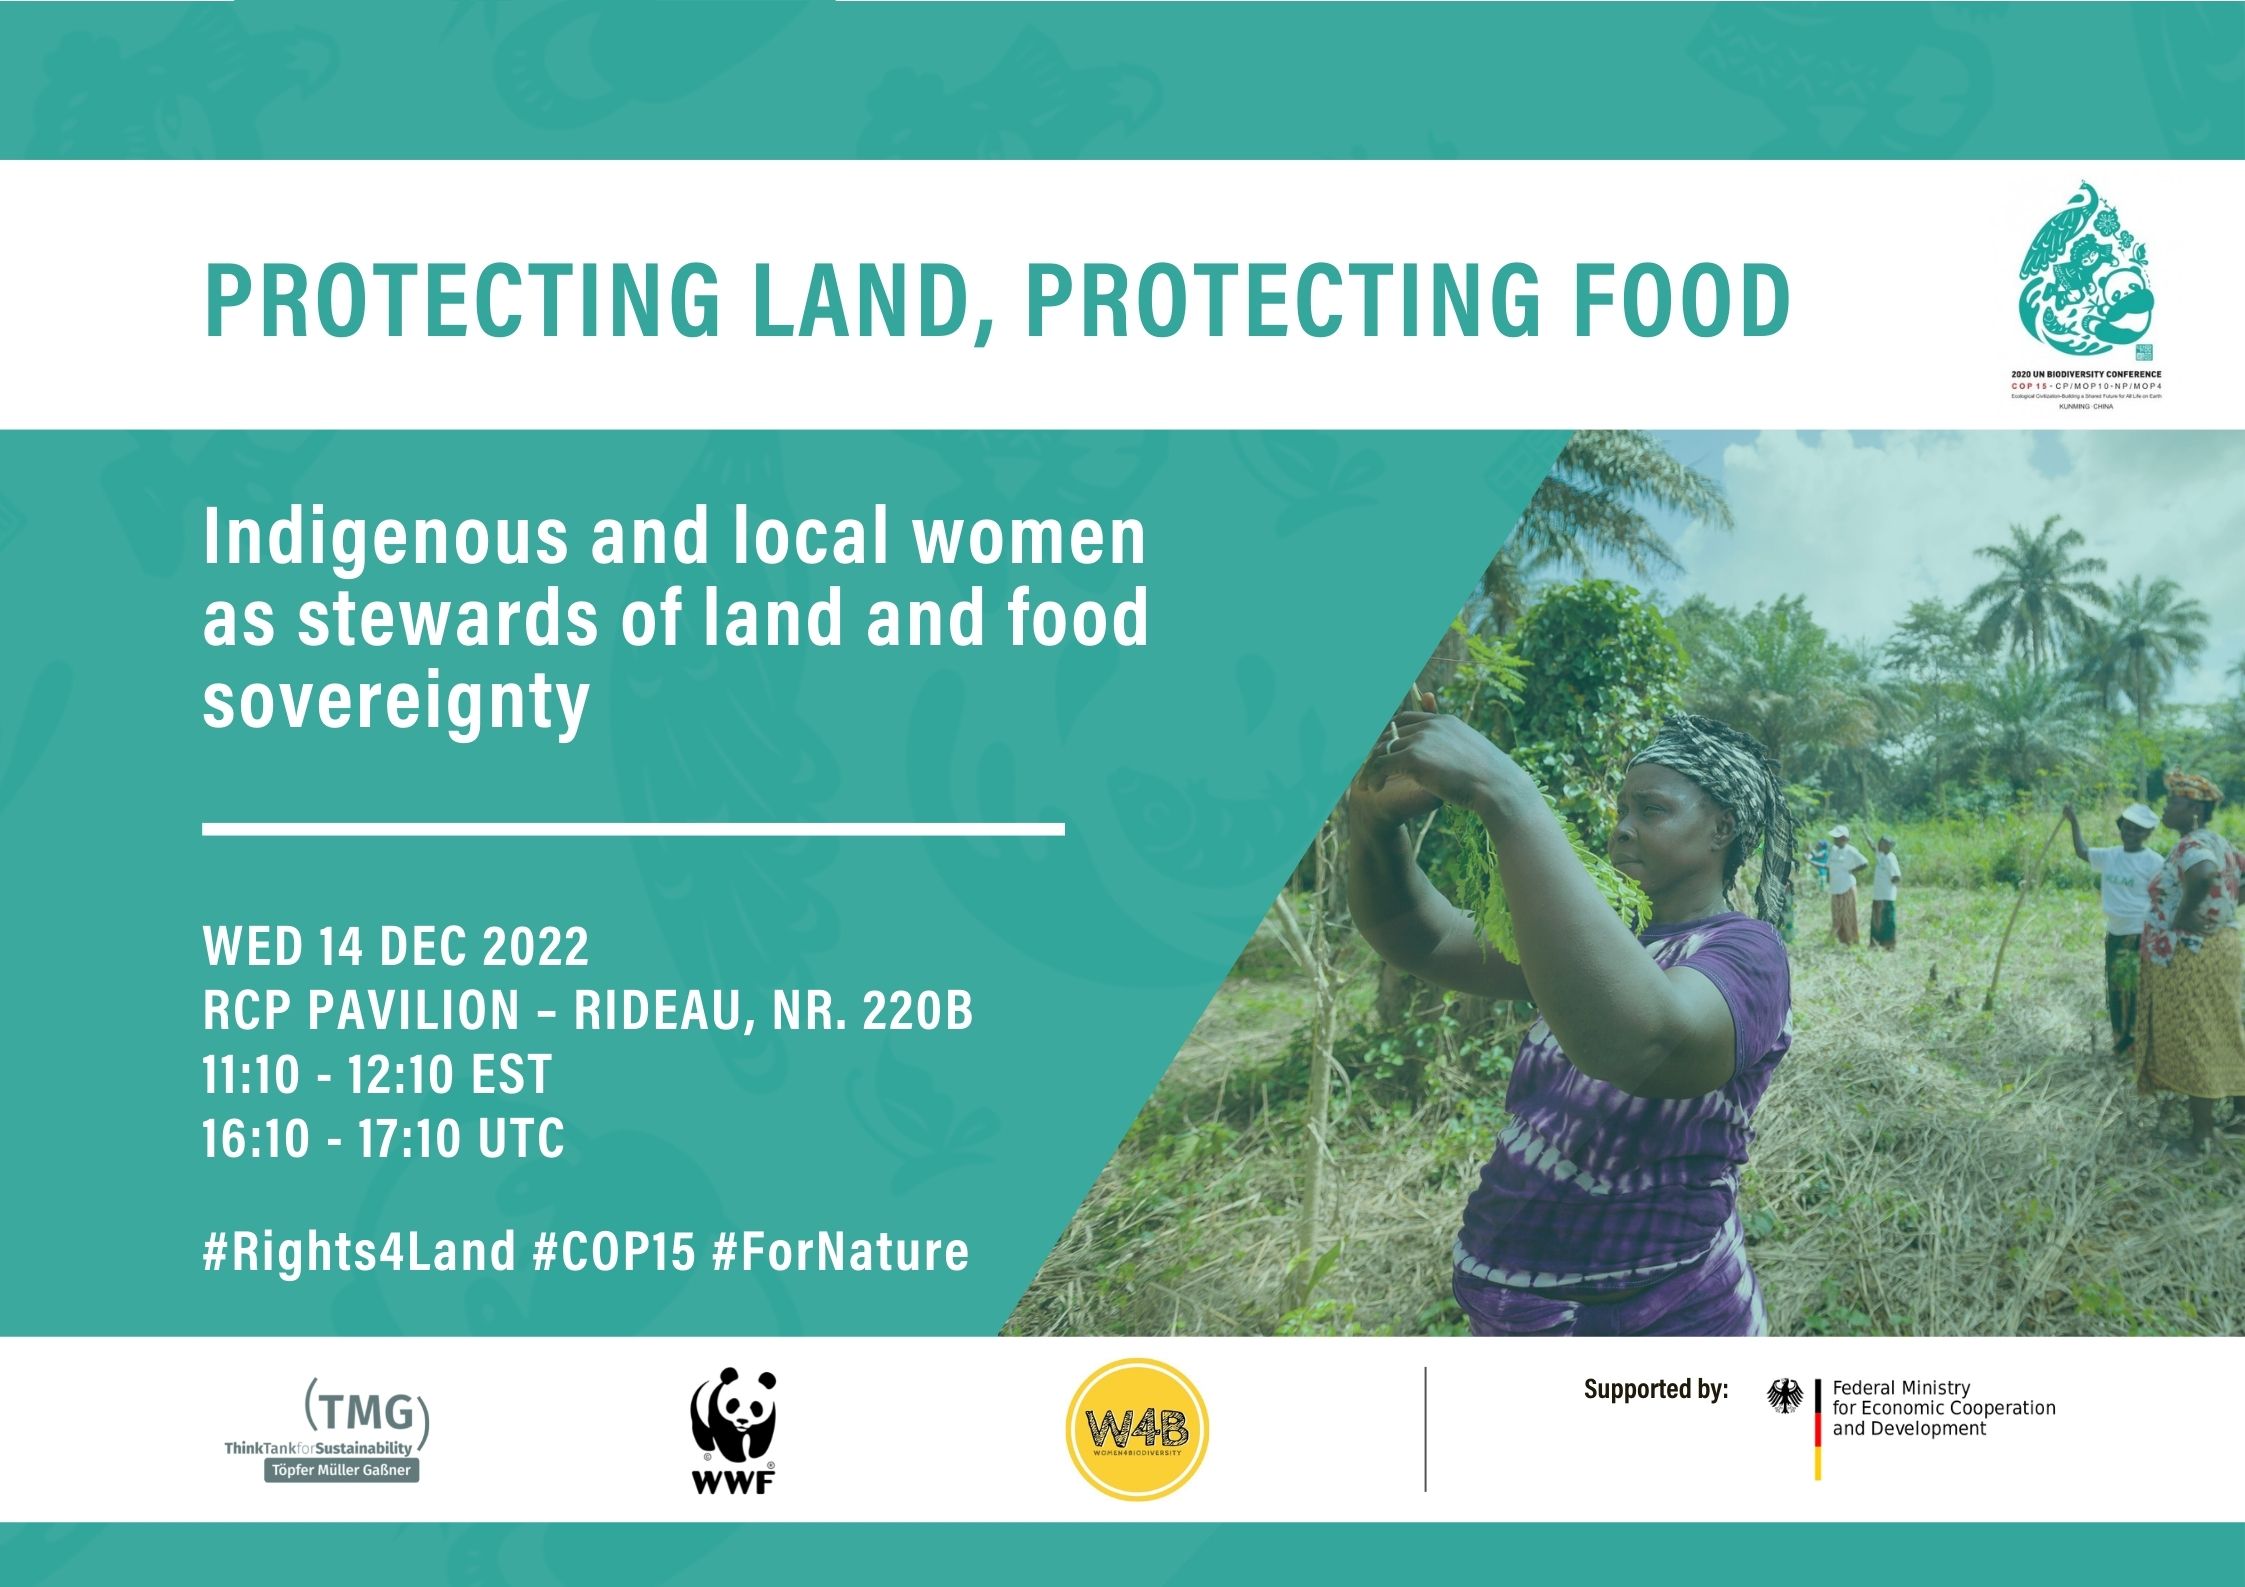 Protecting land, protecting food – Indigenous and local women as stewards of land and food sovereignty